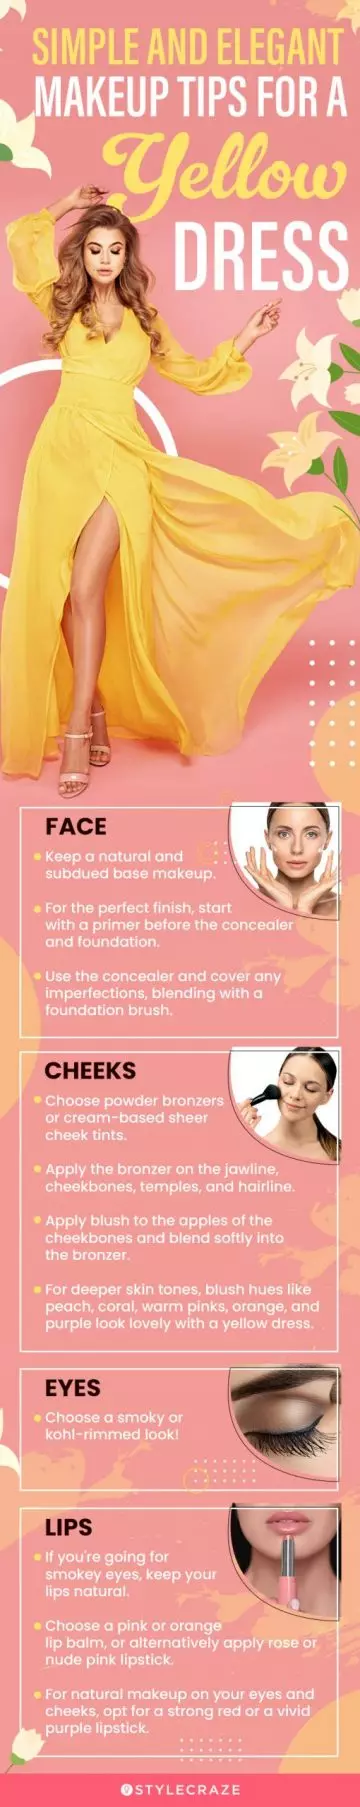 simple and elegant makeup tips for a yellow dress (infographic)